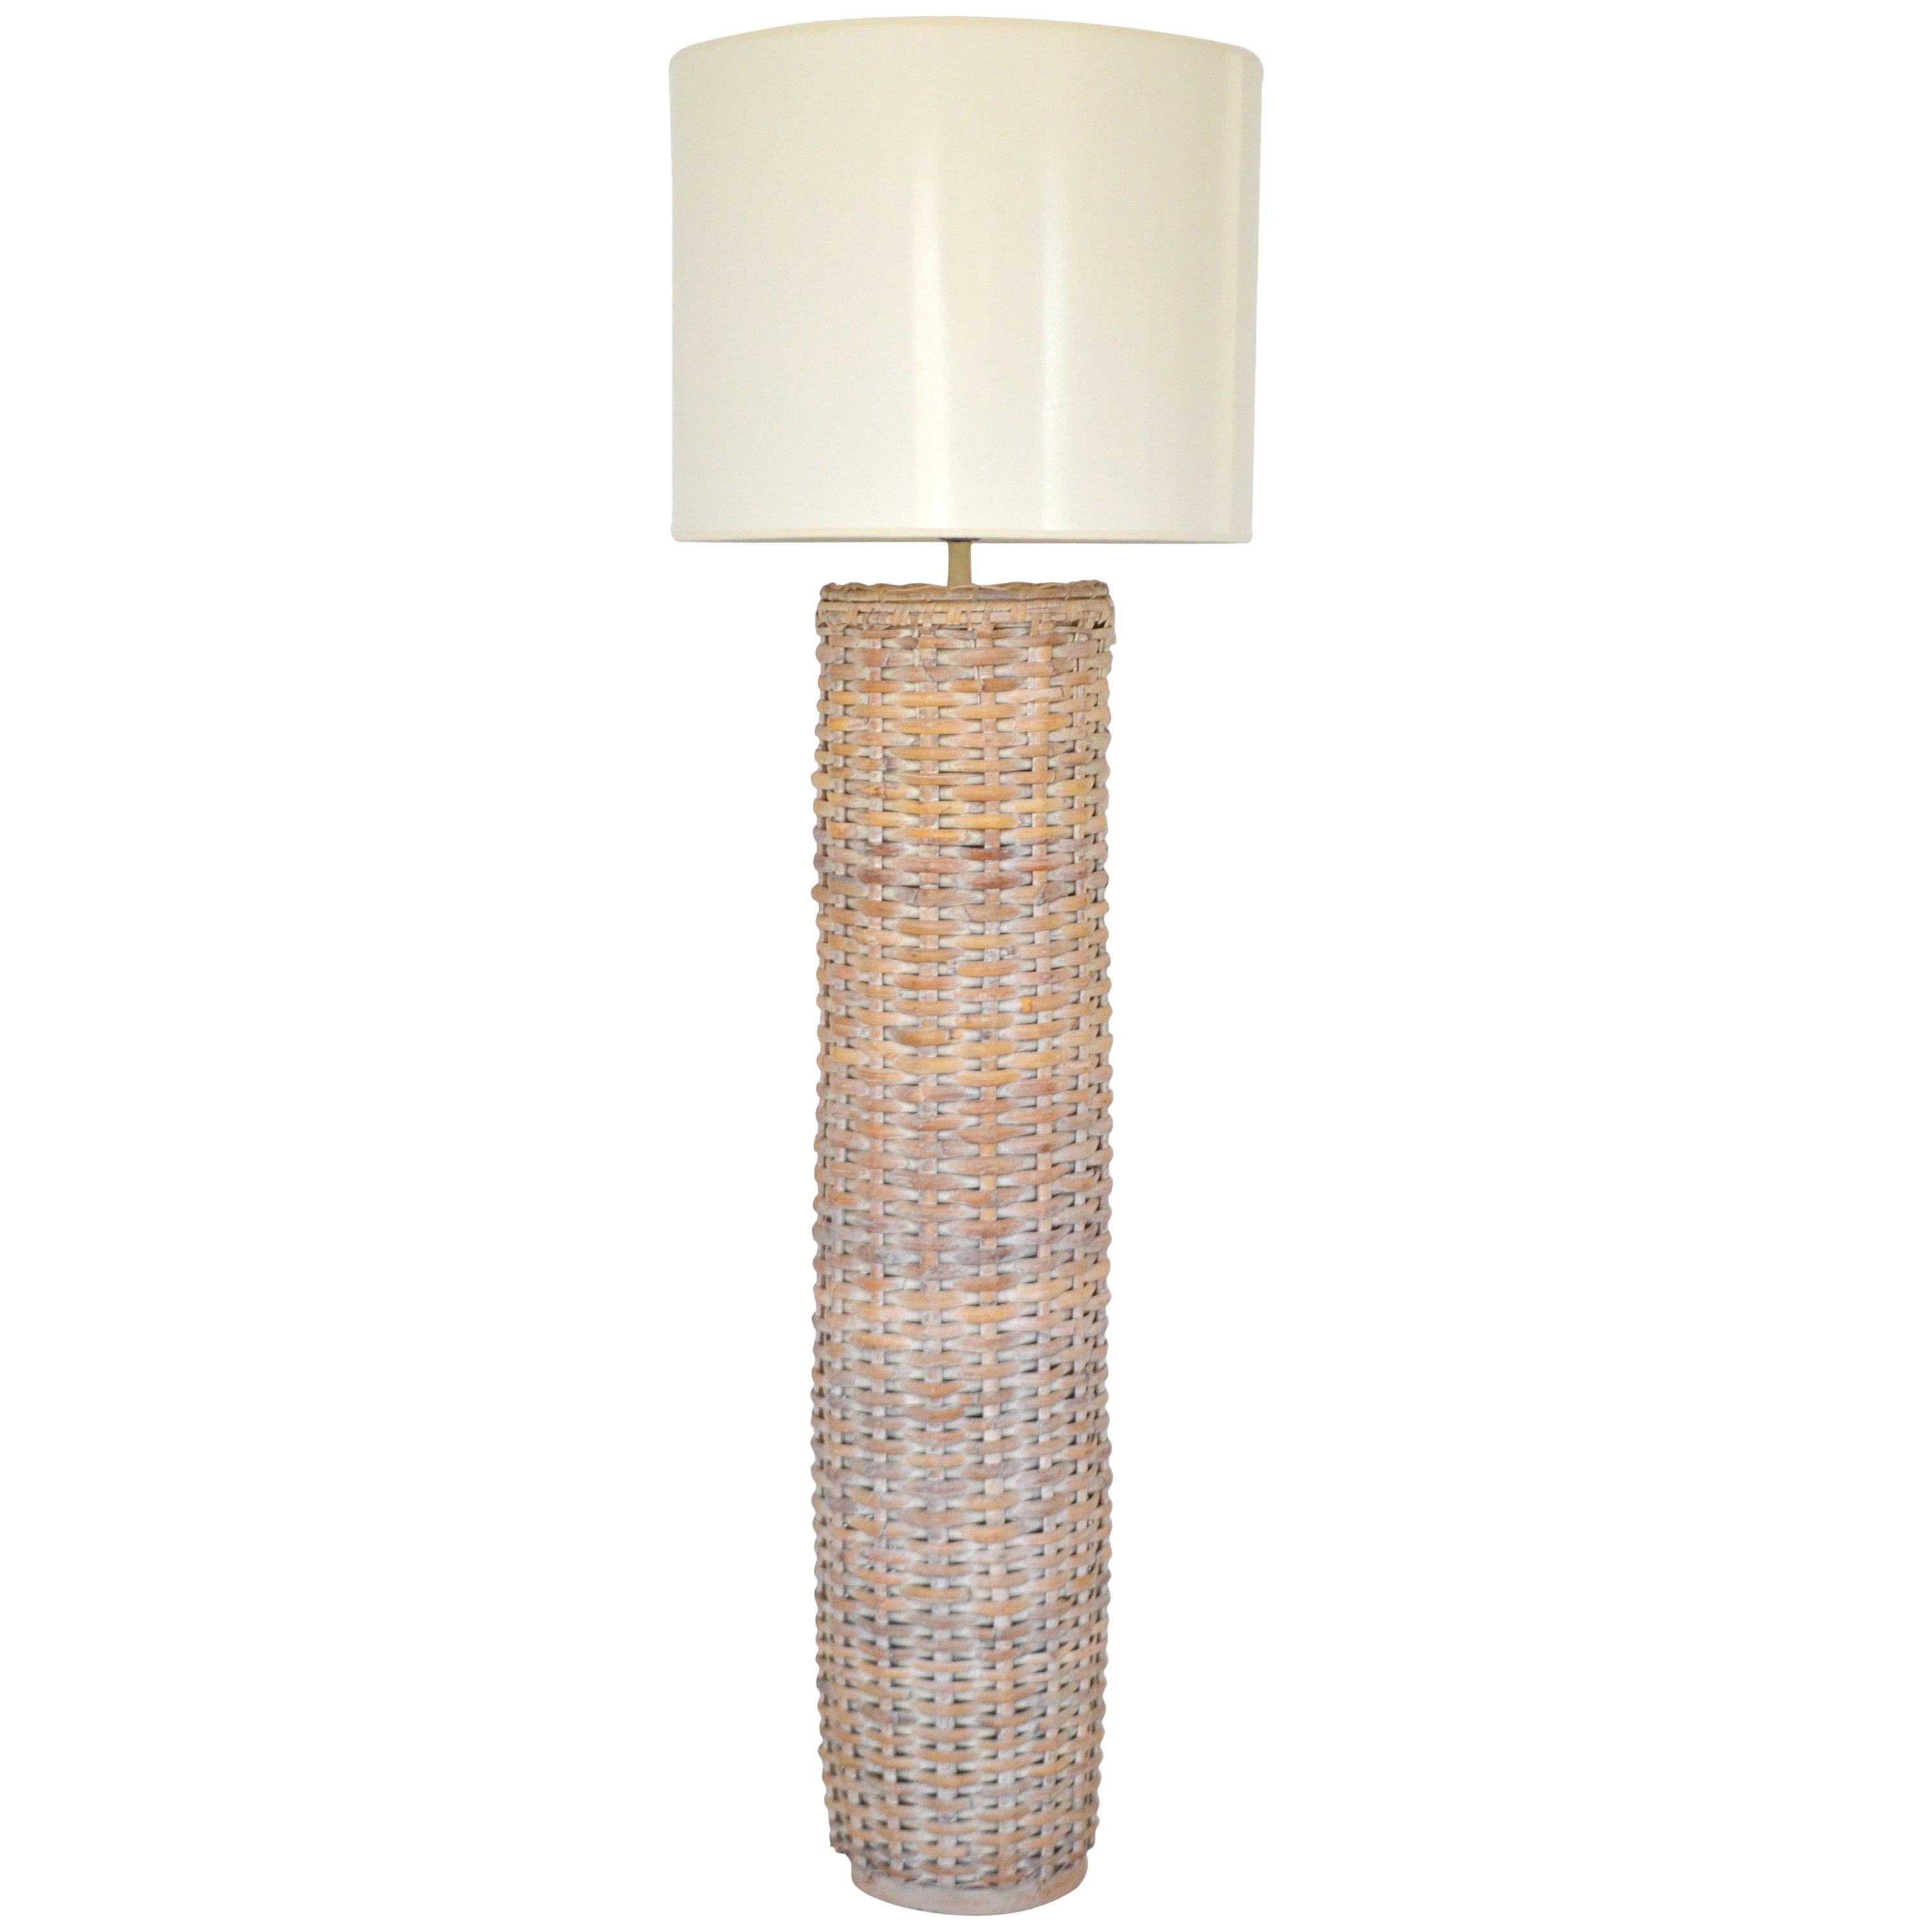 Midcentury Woven Rattan Cylinder Form Floor Lamp For Sale